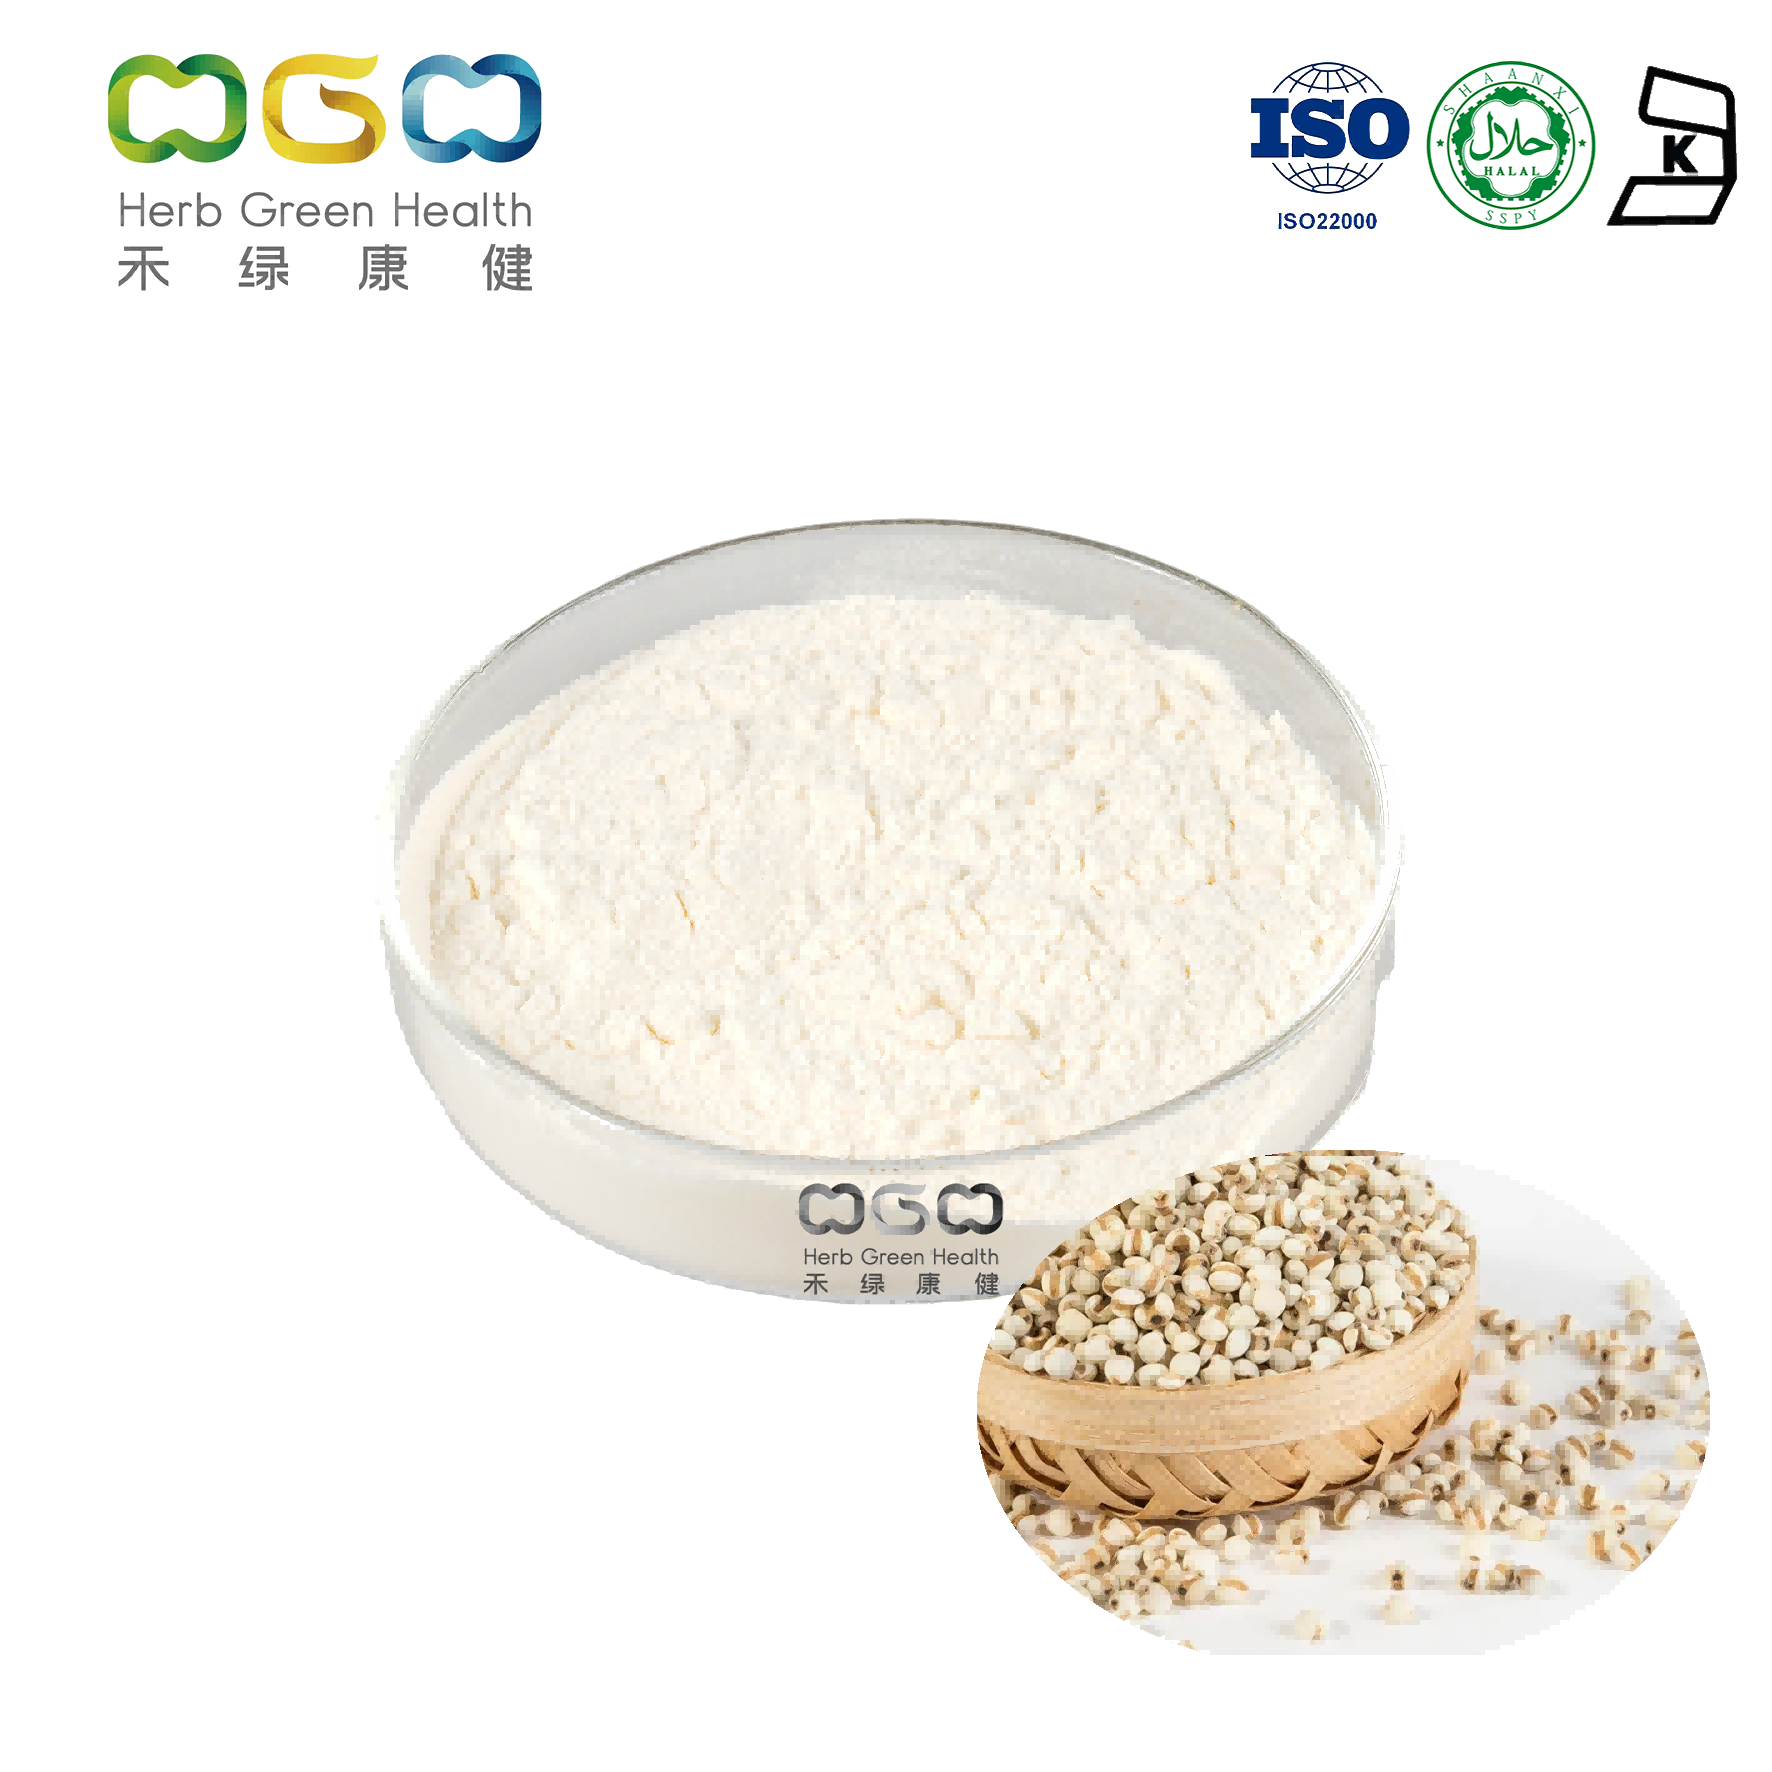 Coix Seed Extract / Job's Tear Extract Polysaccharide 30% zur Gewichtskontrolle